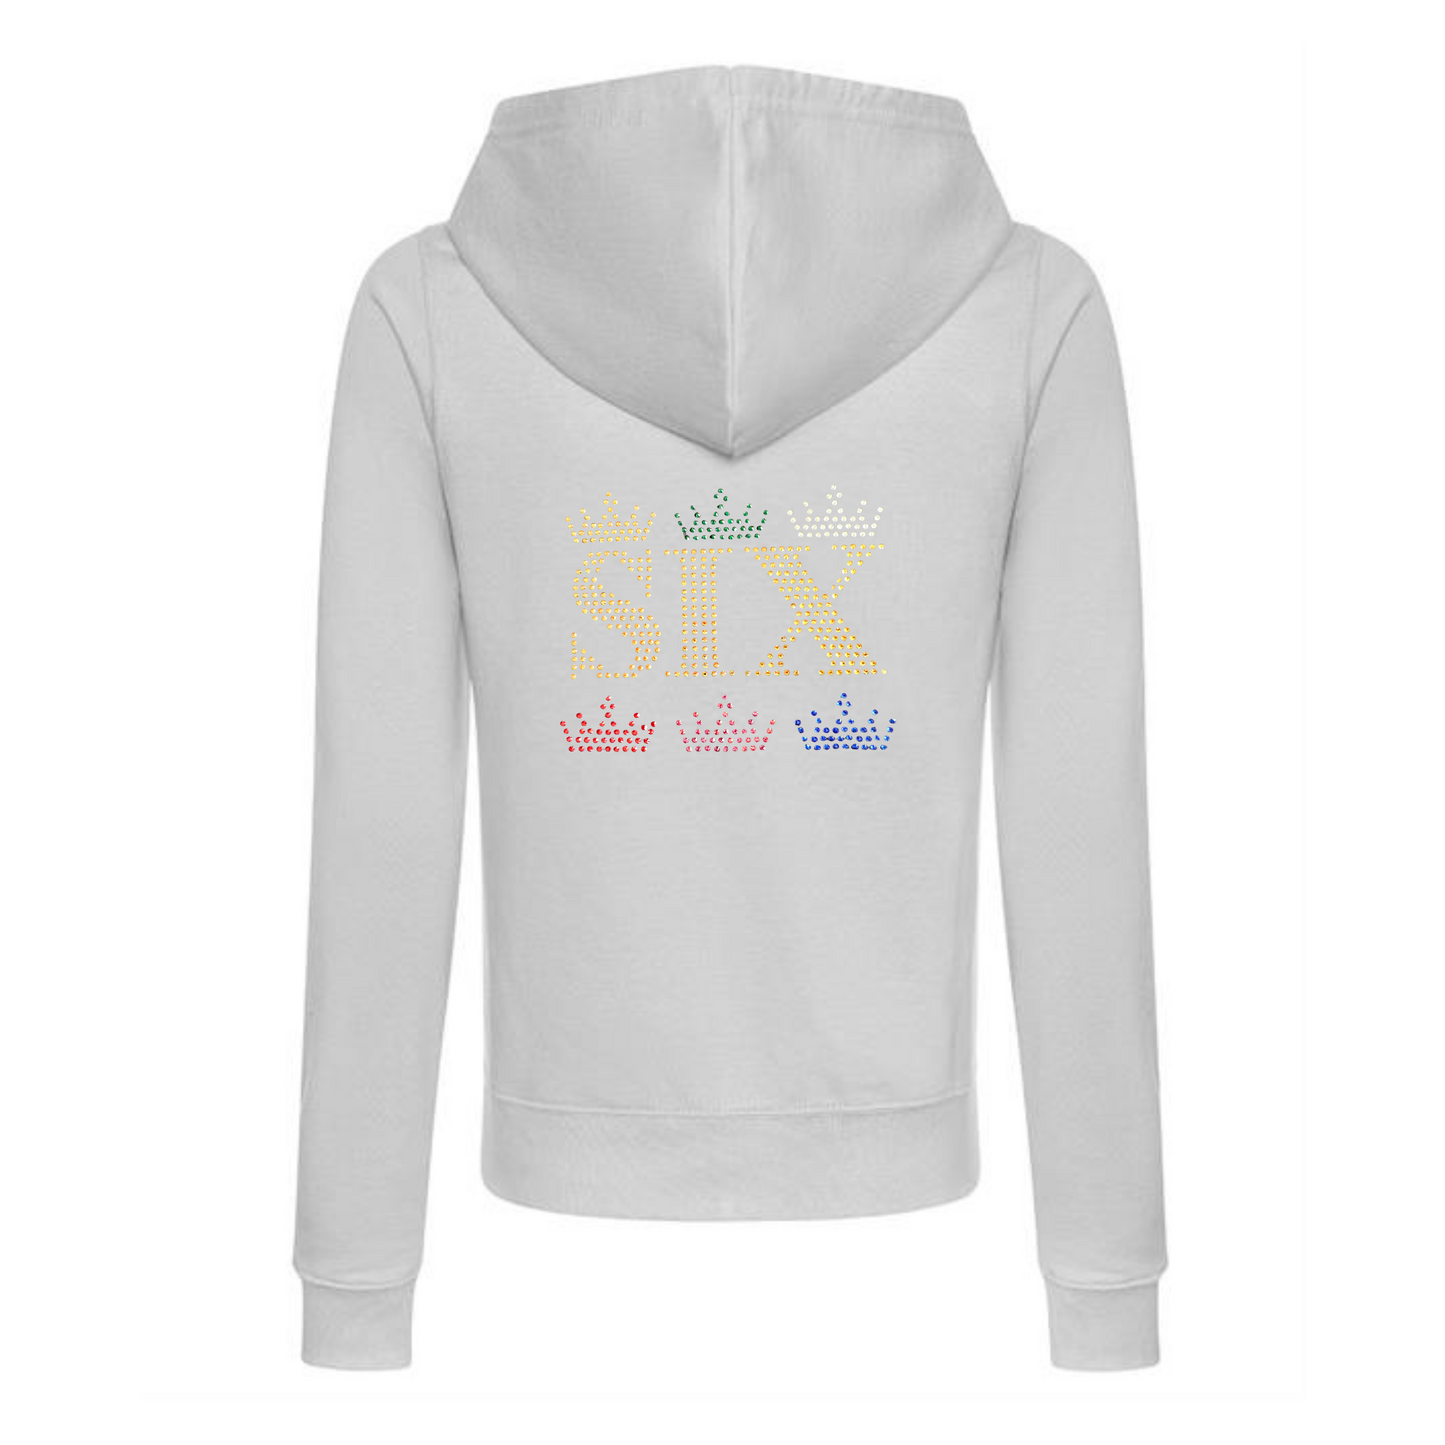 Six the musical cotton Queen crown design Zipped Adult Hoodie